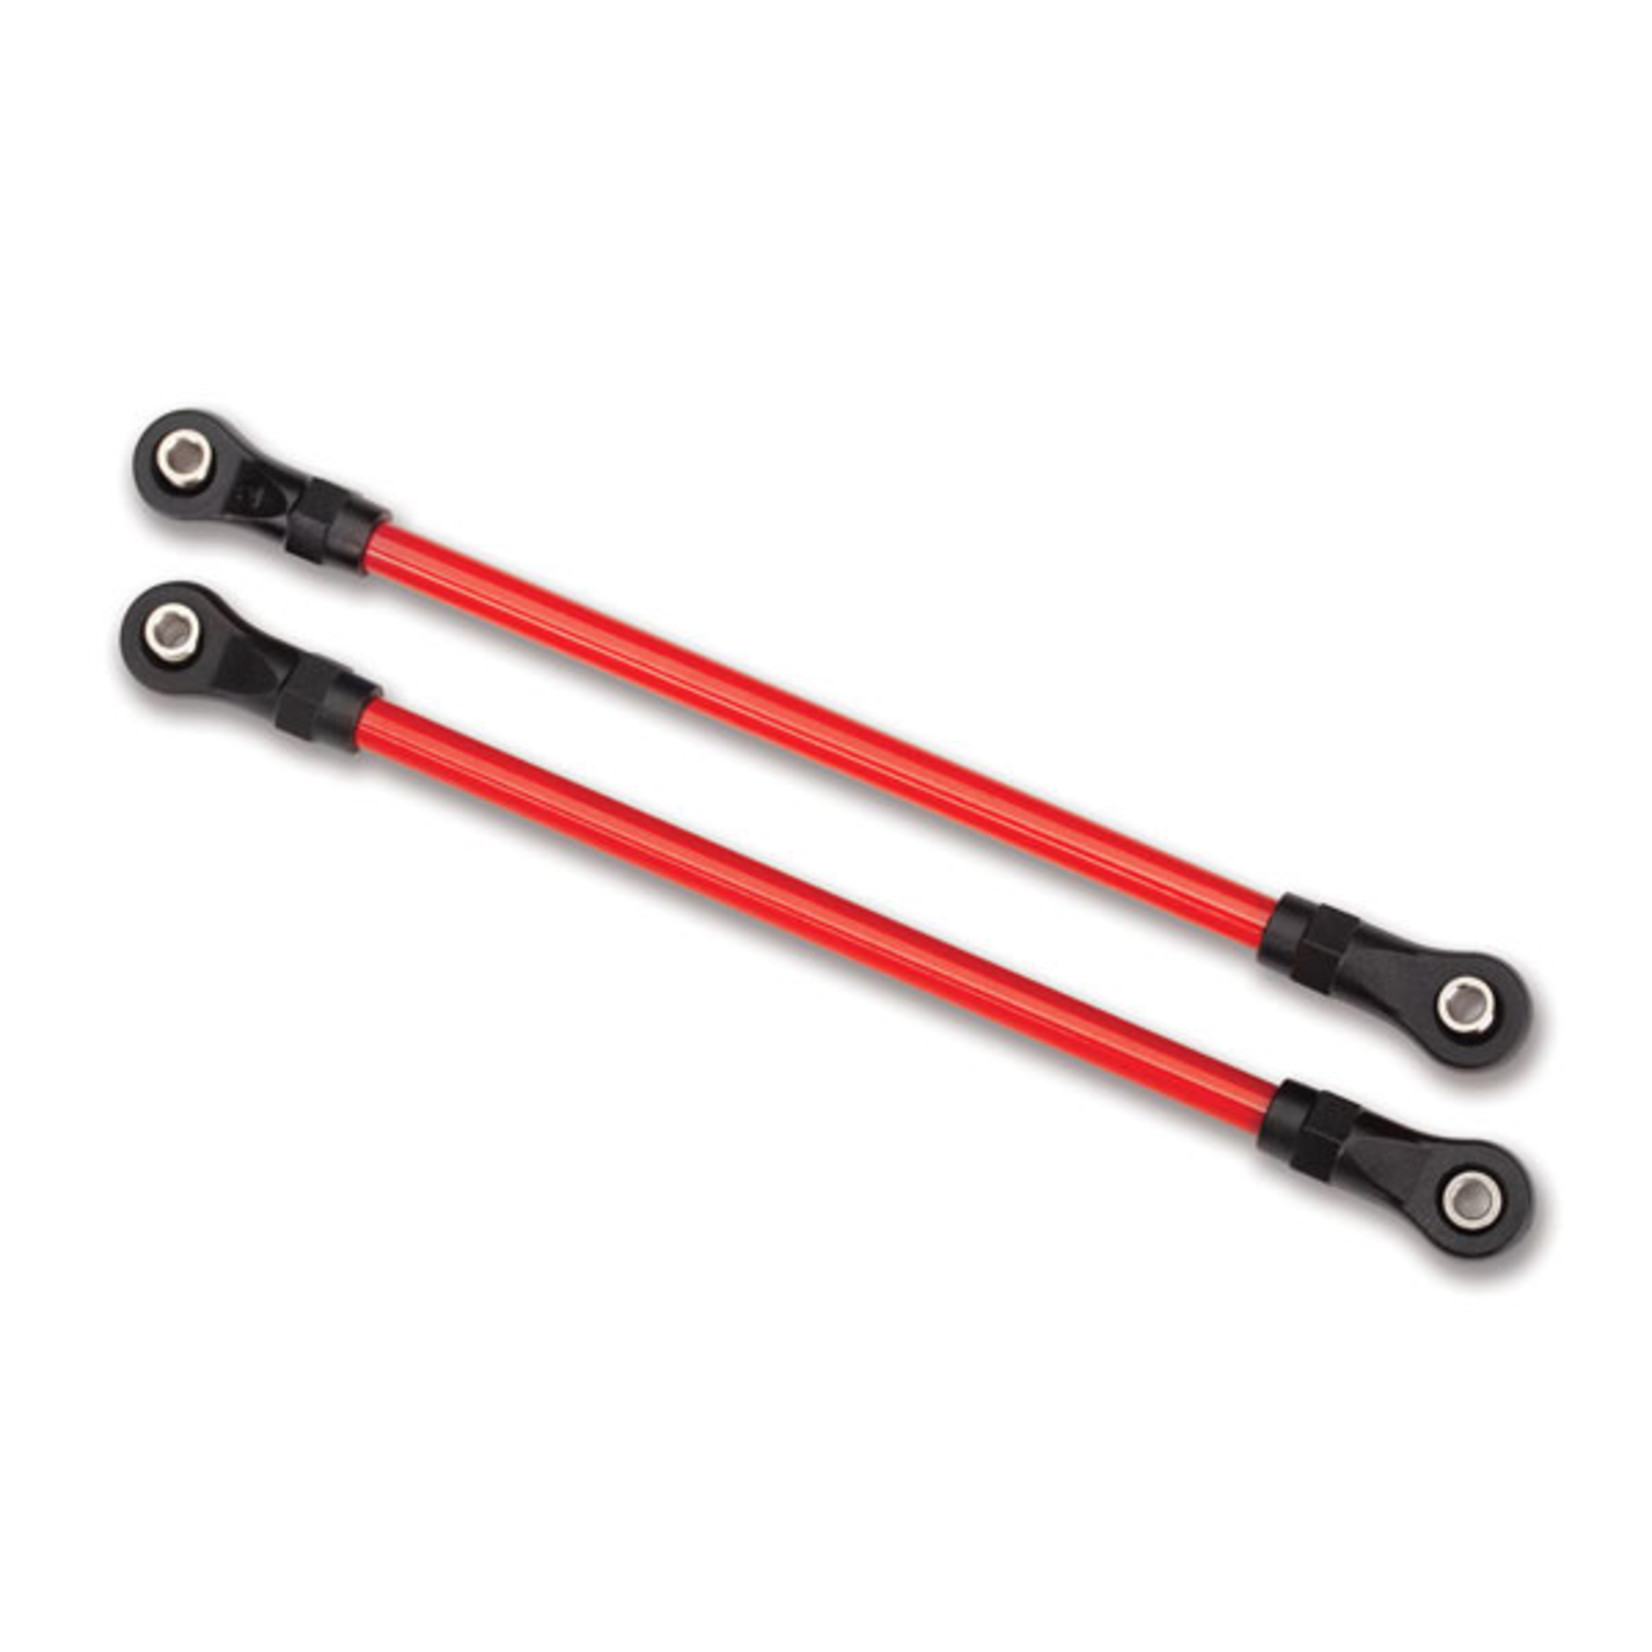 Traxxas 8145R - Suspension links, rear lower, red (2) (5x1